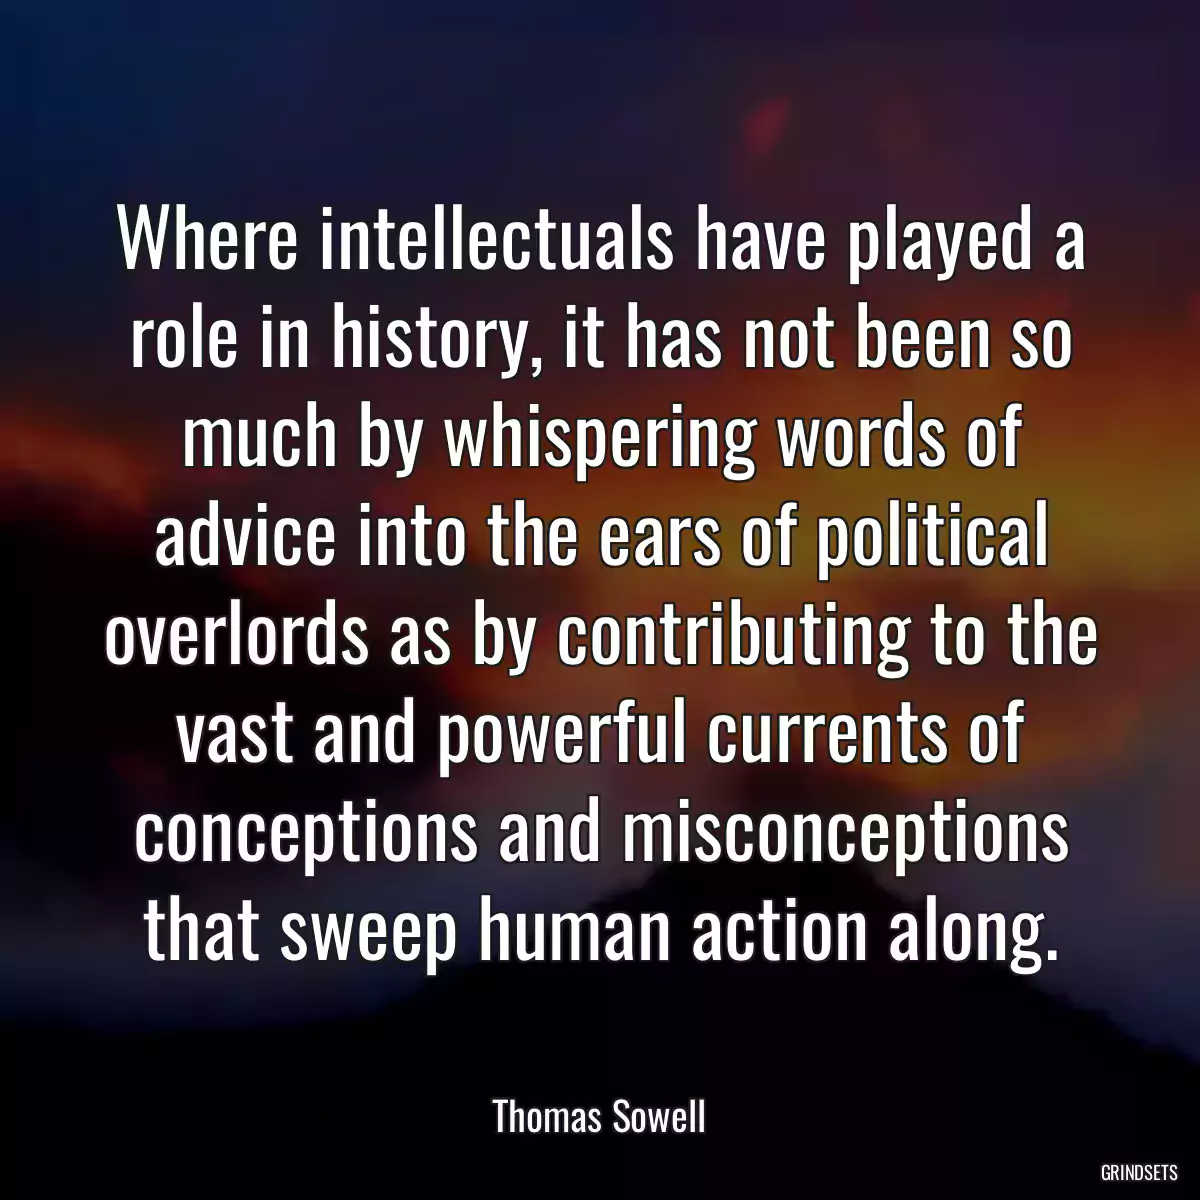 Where intellectuals have played a role in history, it has not been so much by whispering words of advice into the ears of political overlords as by contributing to the vast and powerful currents of conceptions and misconceptions that sweep human action along.